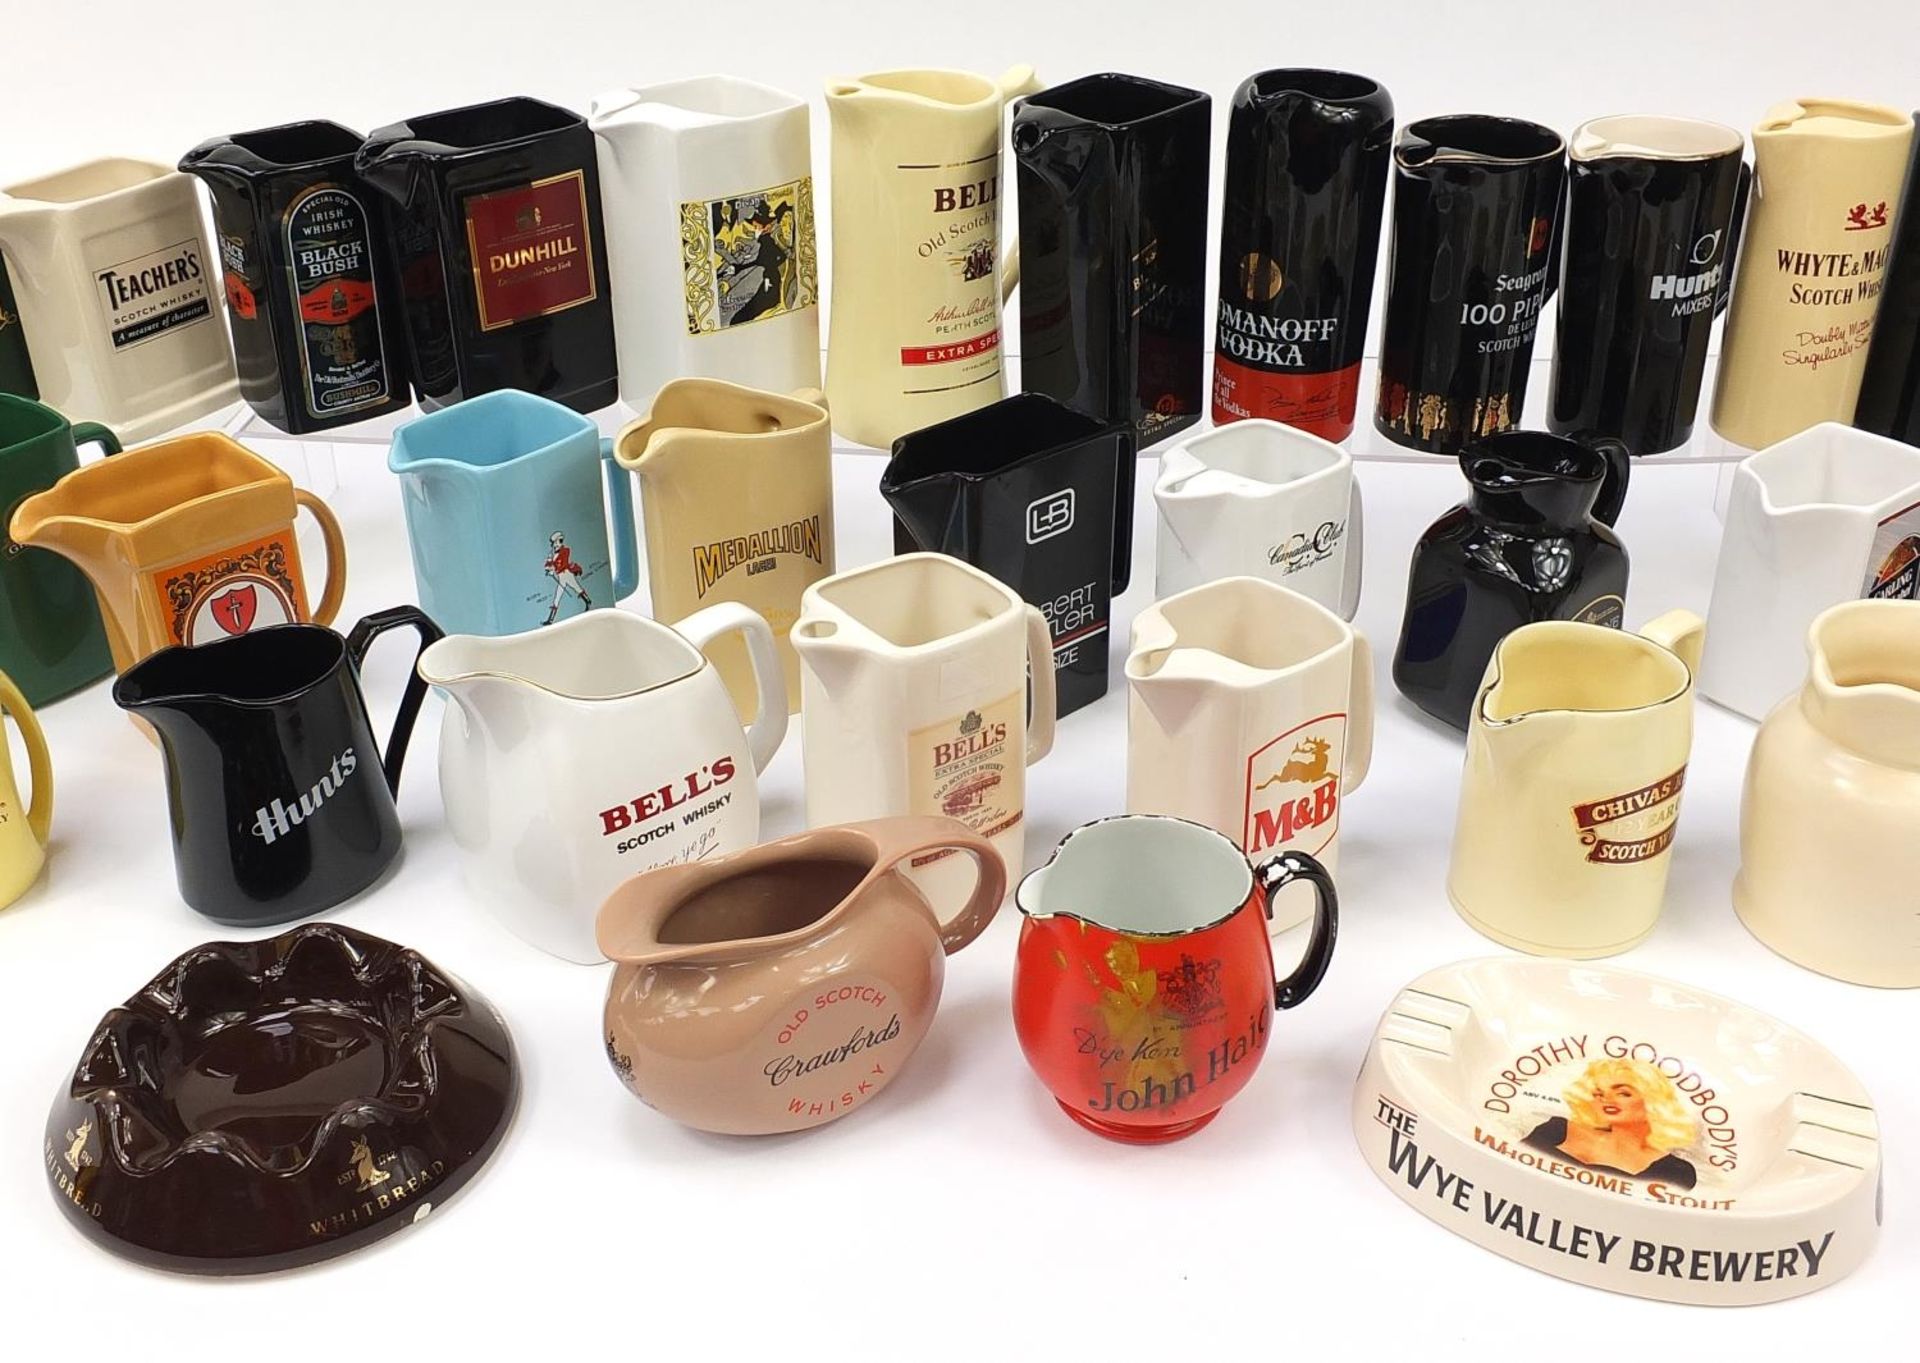 Collection of Breweranalia advertising jugs including Bells, Johnnie Walker and Teachers :For - Image 3 of 5